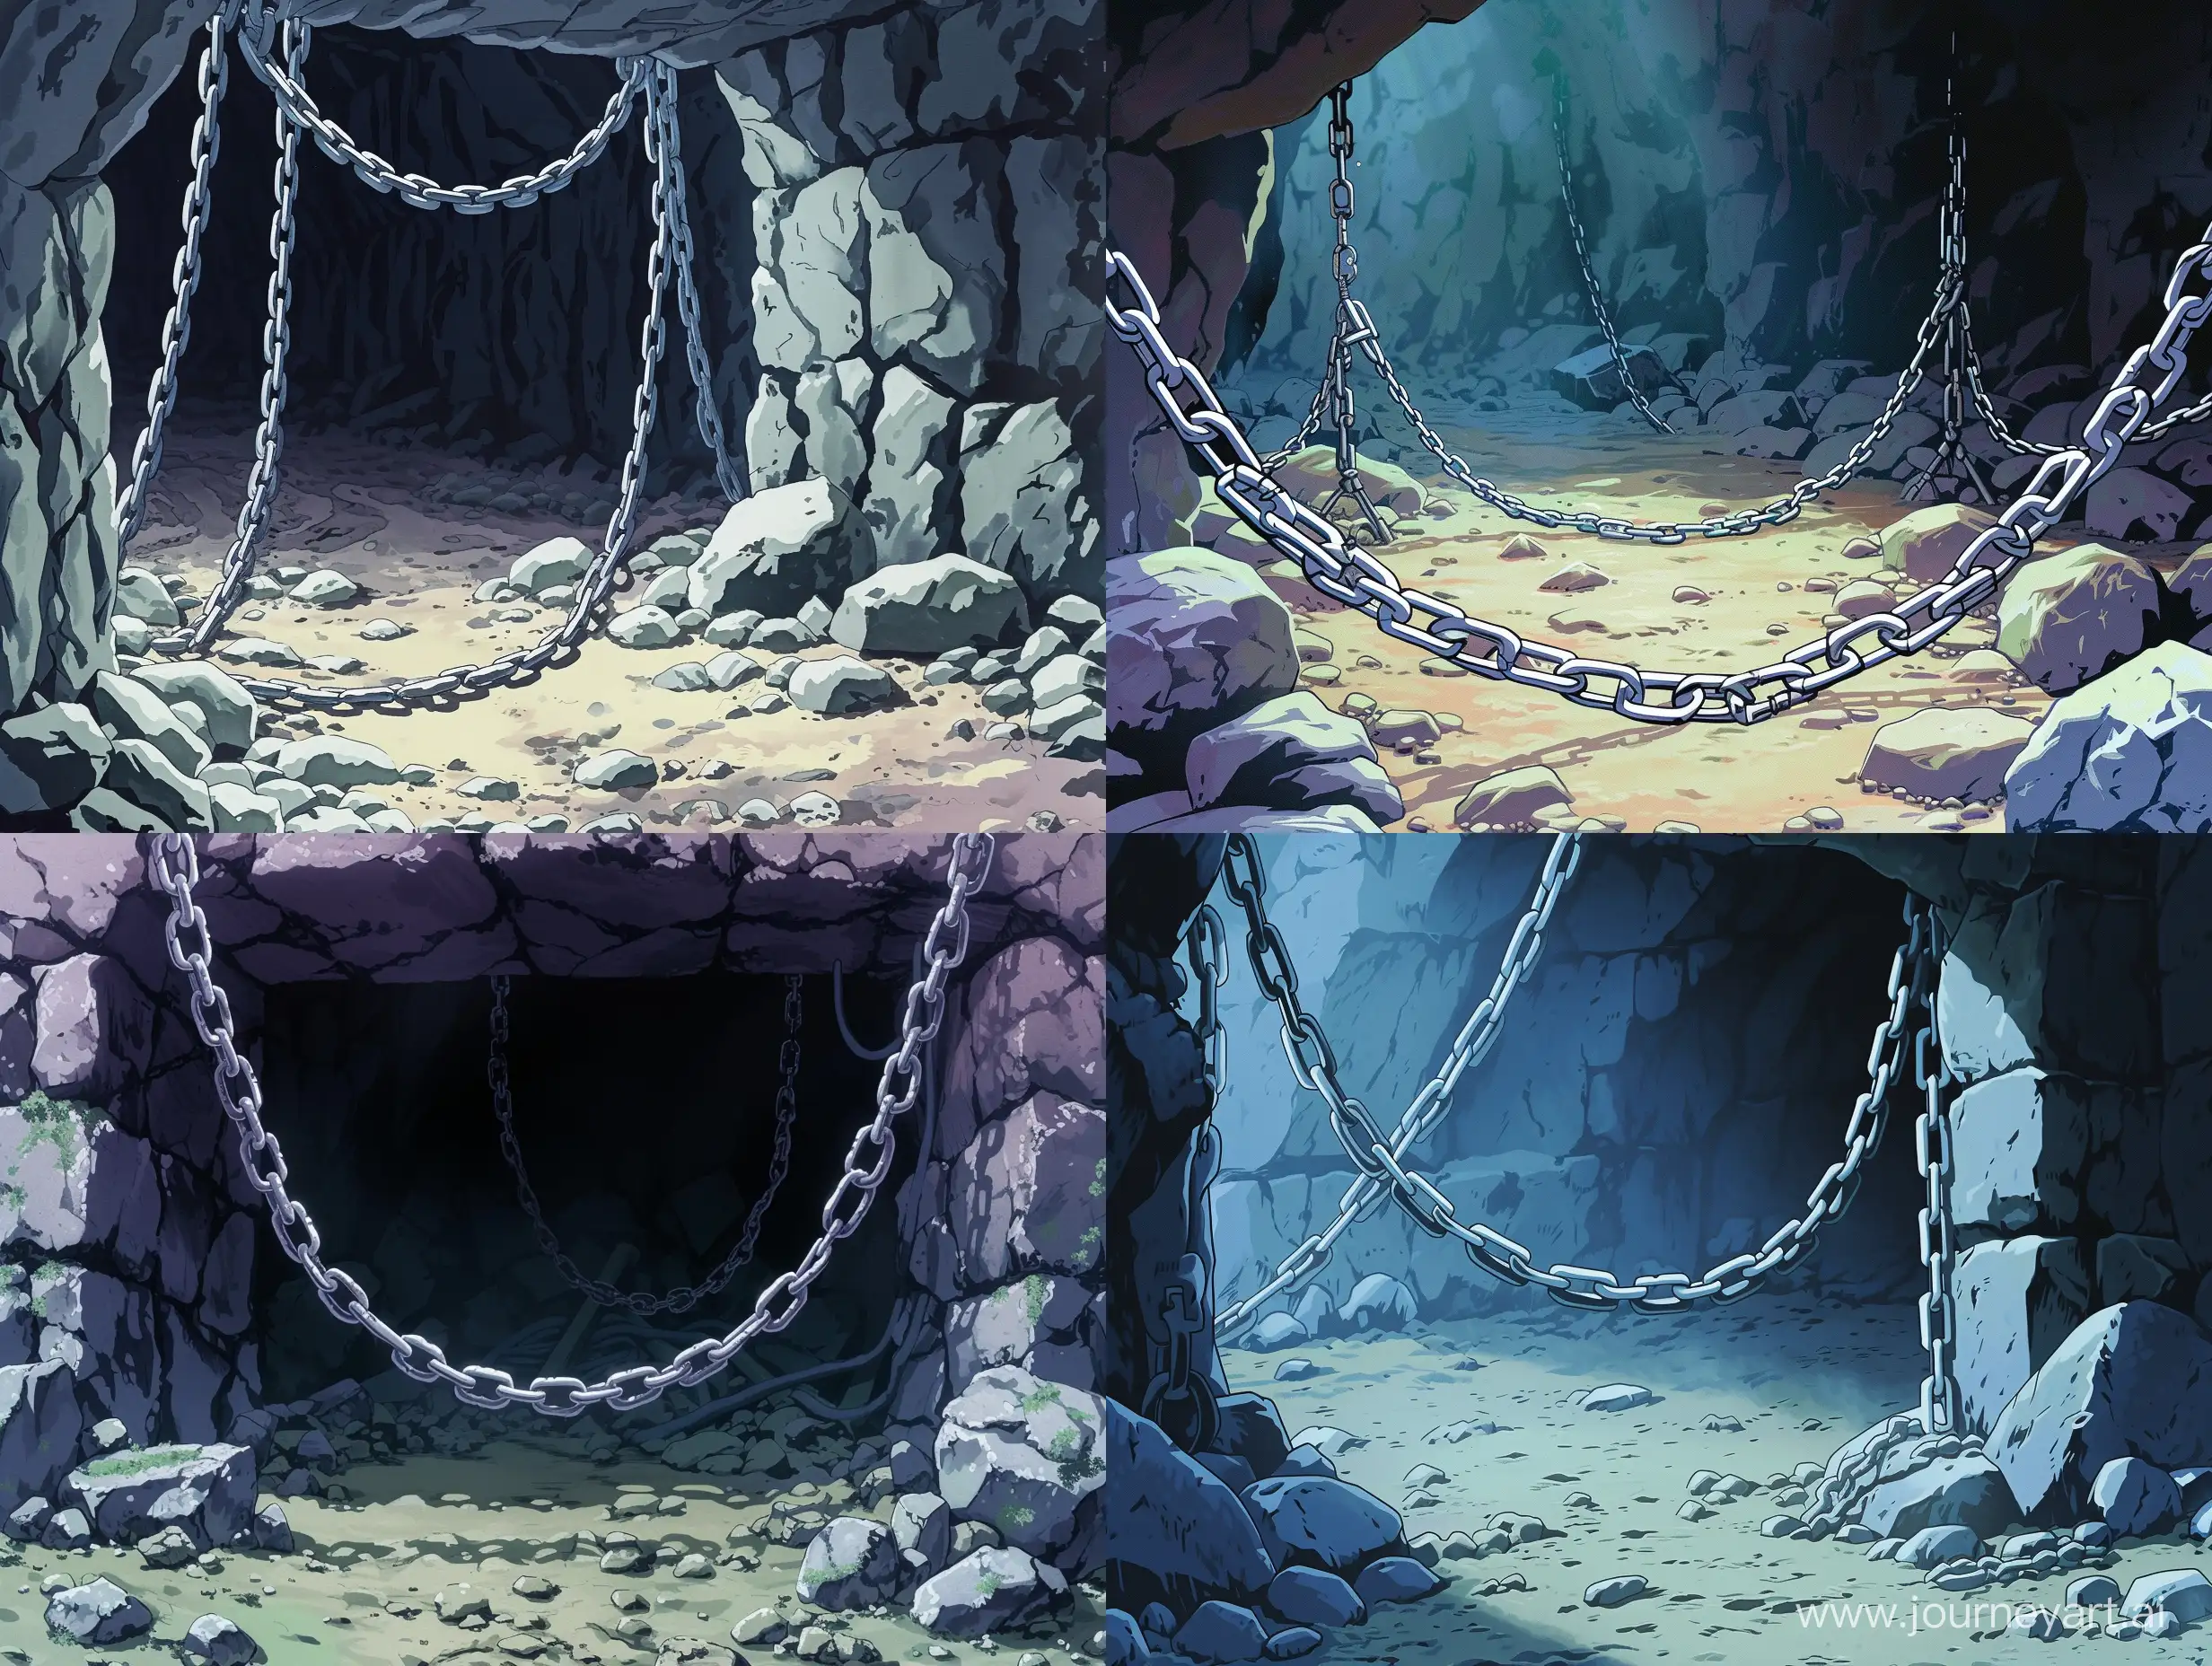 Mysterious-Anime-Cave-with-Chains-and-Stones